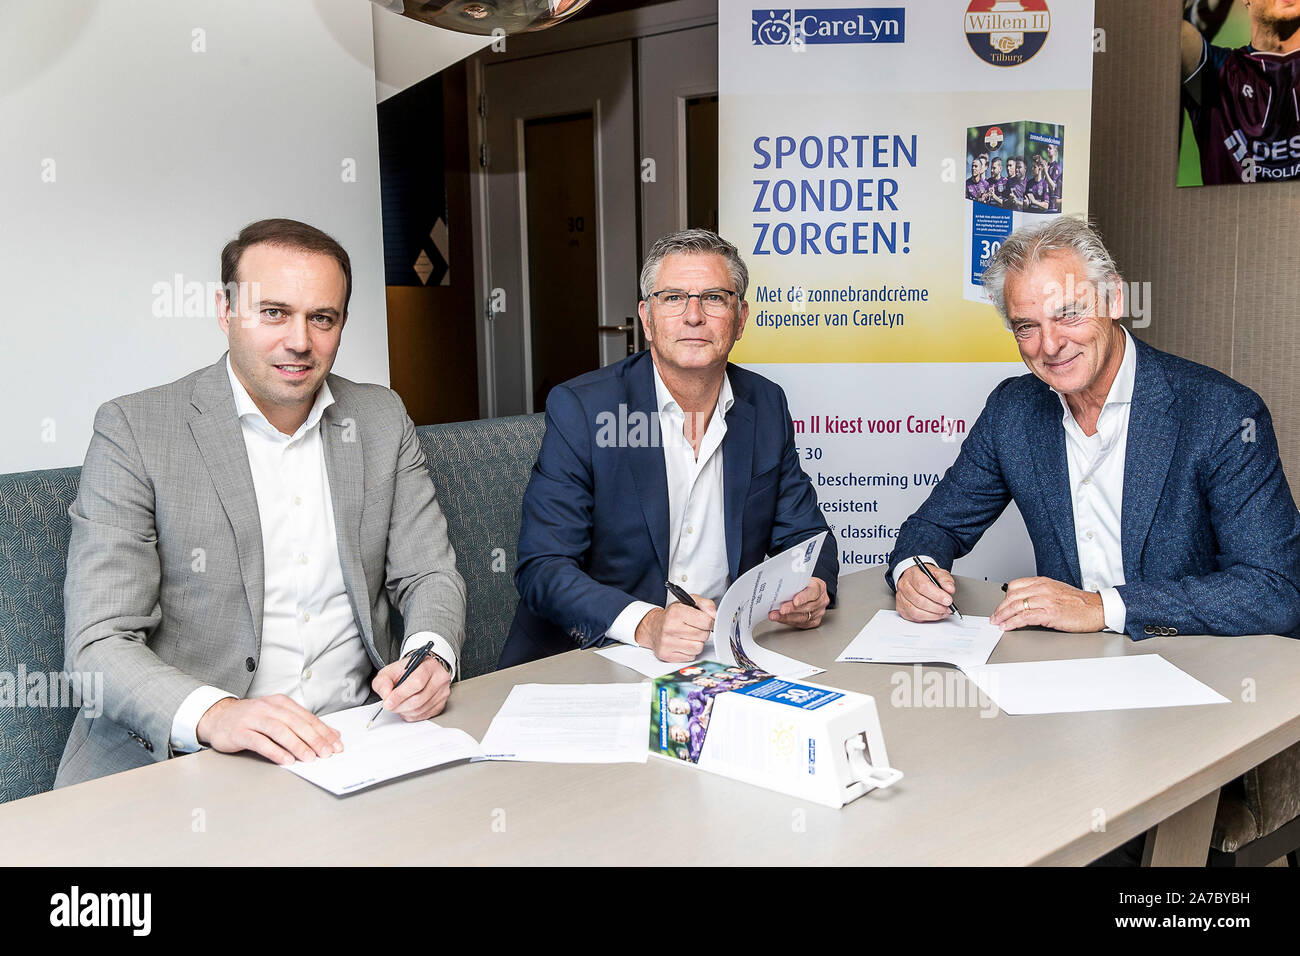 Tilburg - CareLyn 31-10-2019. Koning Willem II stadion. Buitensport, Voetbal. Willem II is the first BVO that concerns about skin cancer and signs a contract with CareLyn. Joris Mathijsen, Martin van Geel, Rene van der Kolk. Credit: Pro Shots/Alamy Live News Stock Photo